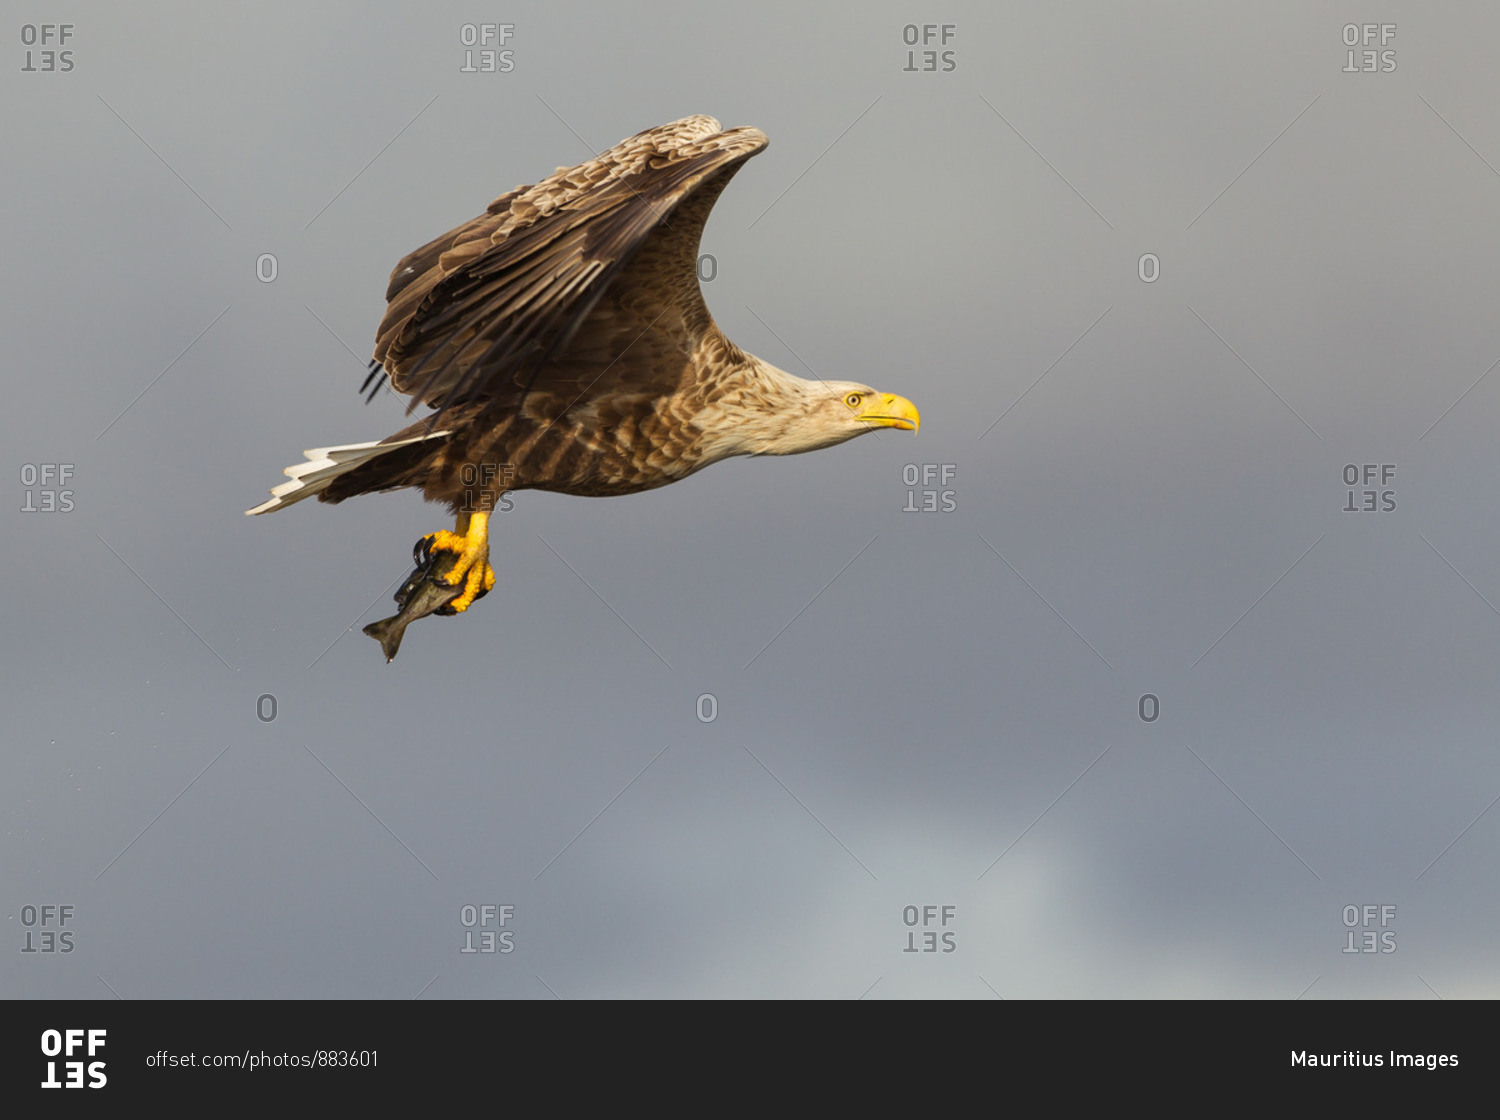 White-tailed eagle flying with fish as prey